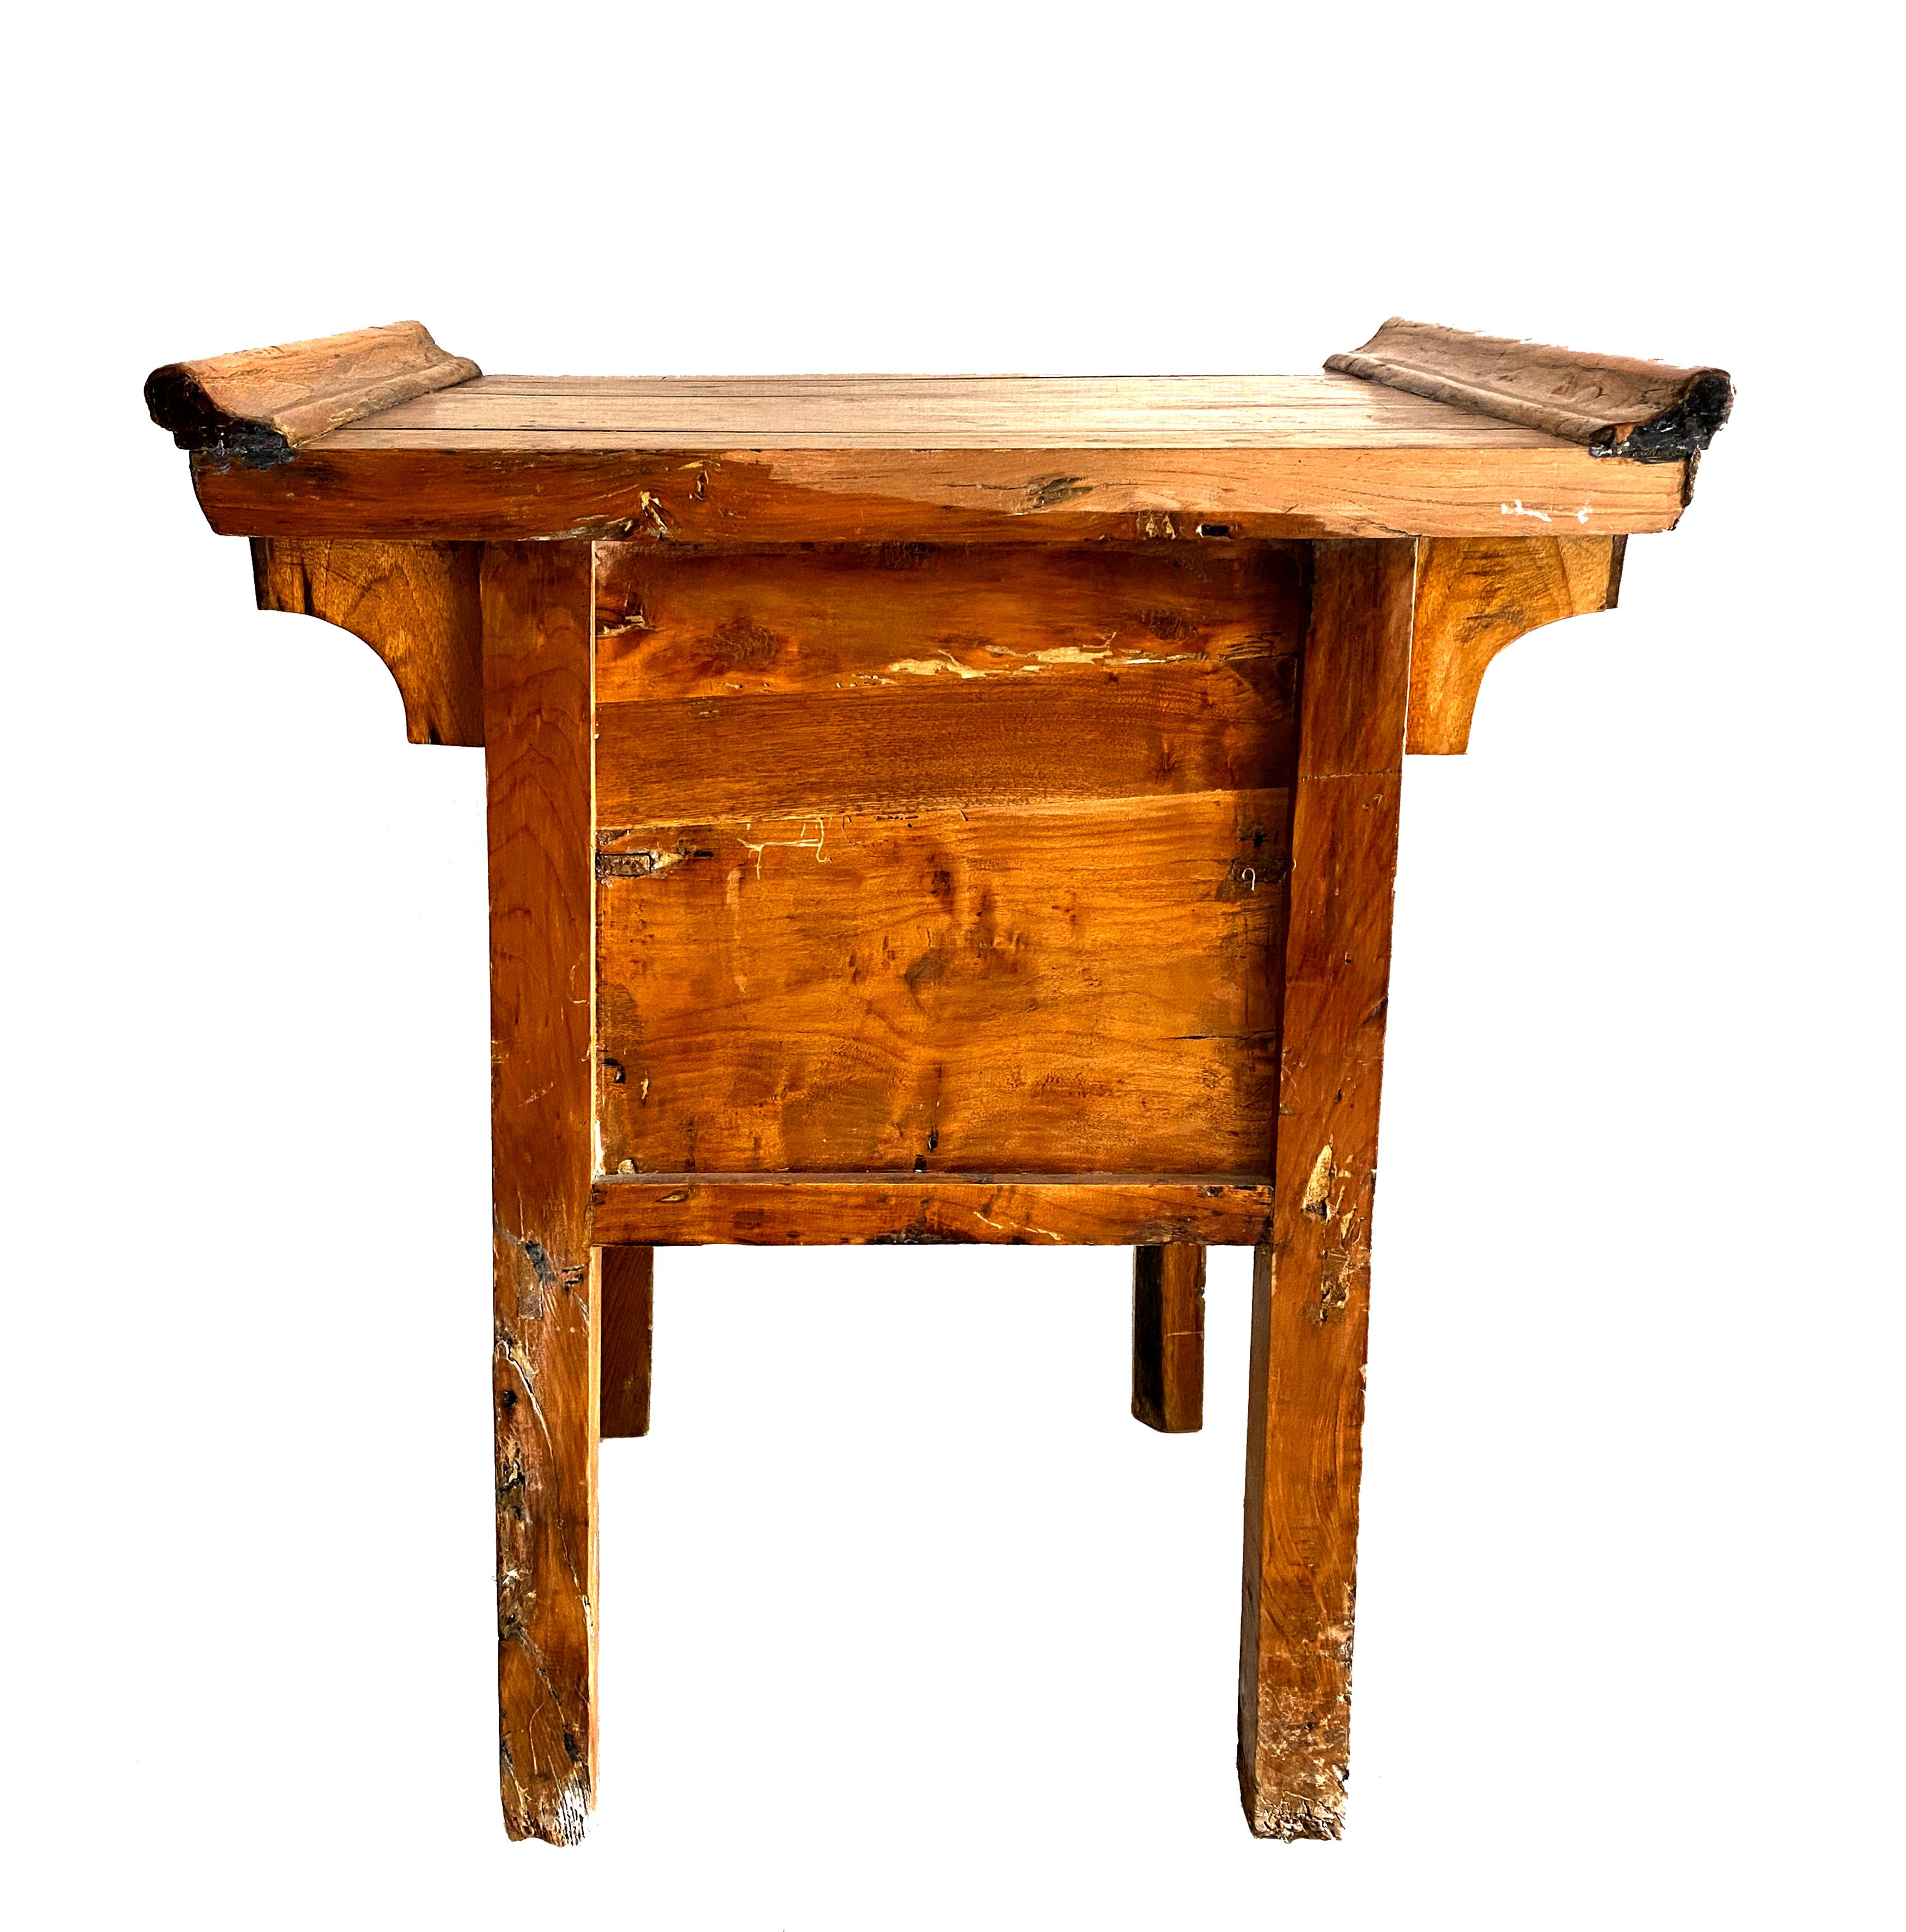 Early 20th Century Antique Chinese Beech Hardwood Single Drawer Carved Coffer Table For Sale